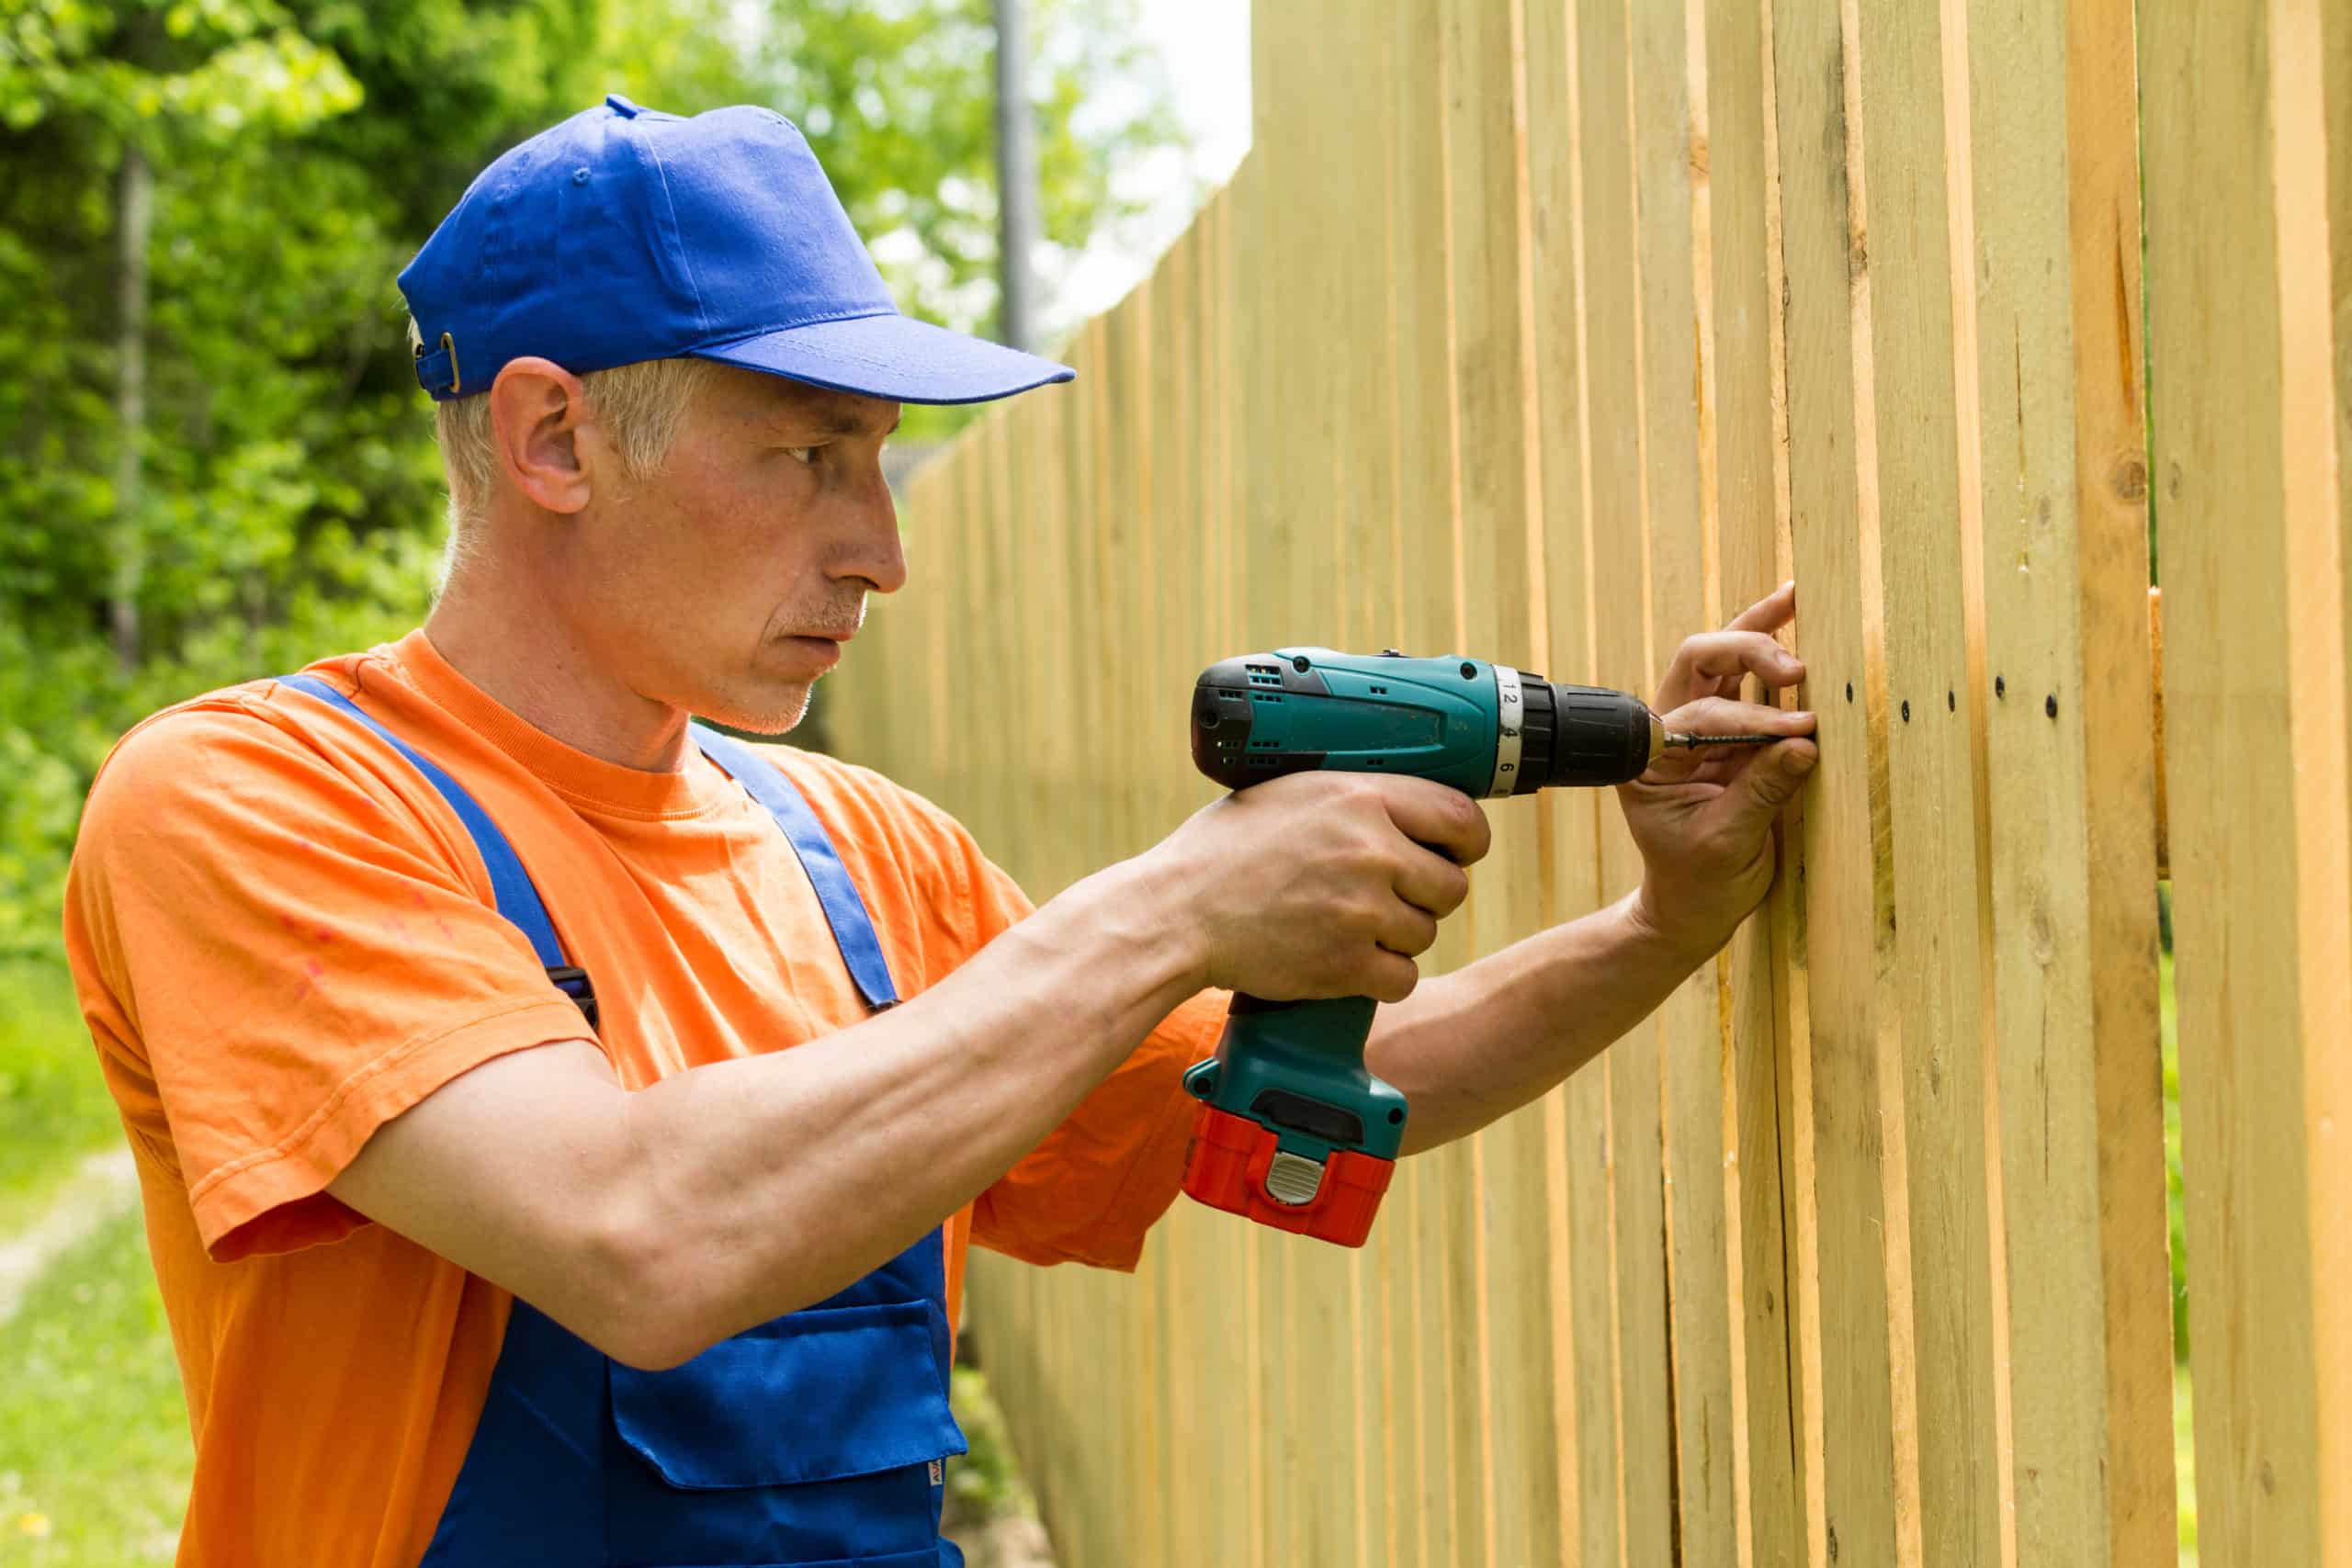 A fencing and decking contractor can keep costs down by paying close attention to his fence build. The contractor is wearing an orange shirt with a blue hat and coveralls. He's drilling into a wooden fence with a cordless drill.